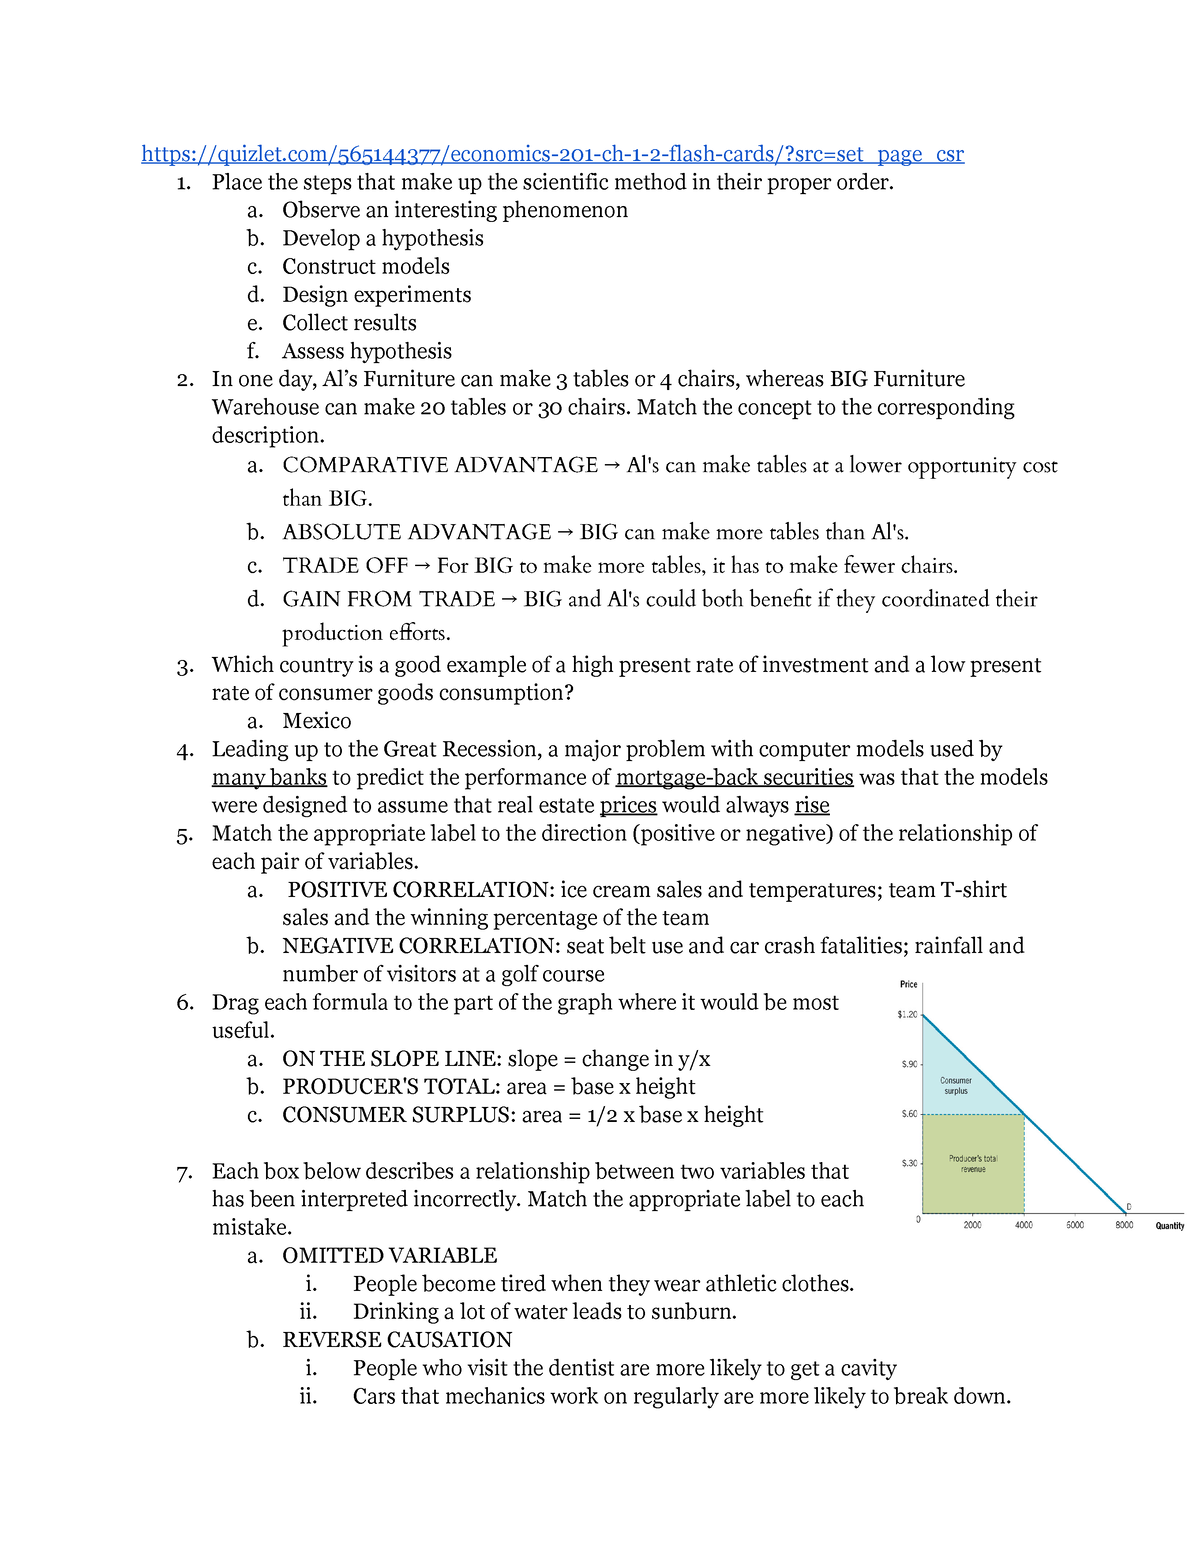 inquizitive chapter 2 research methods answers